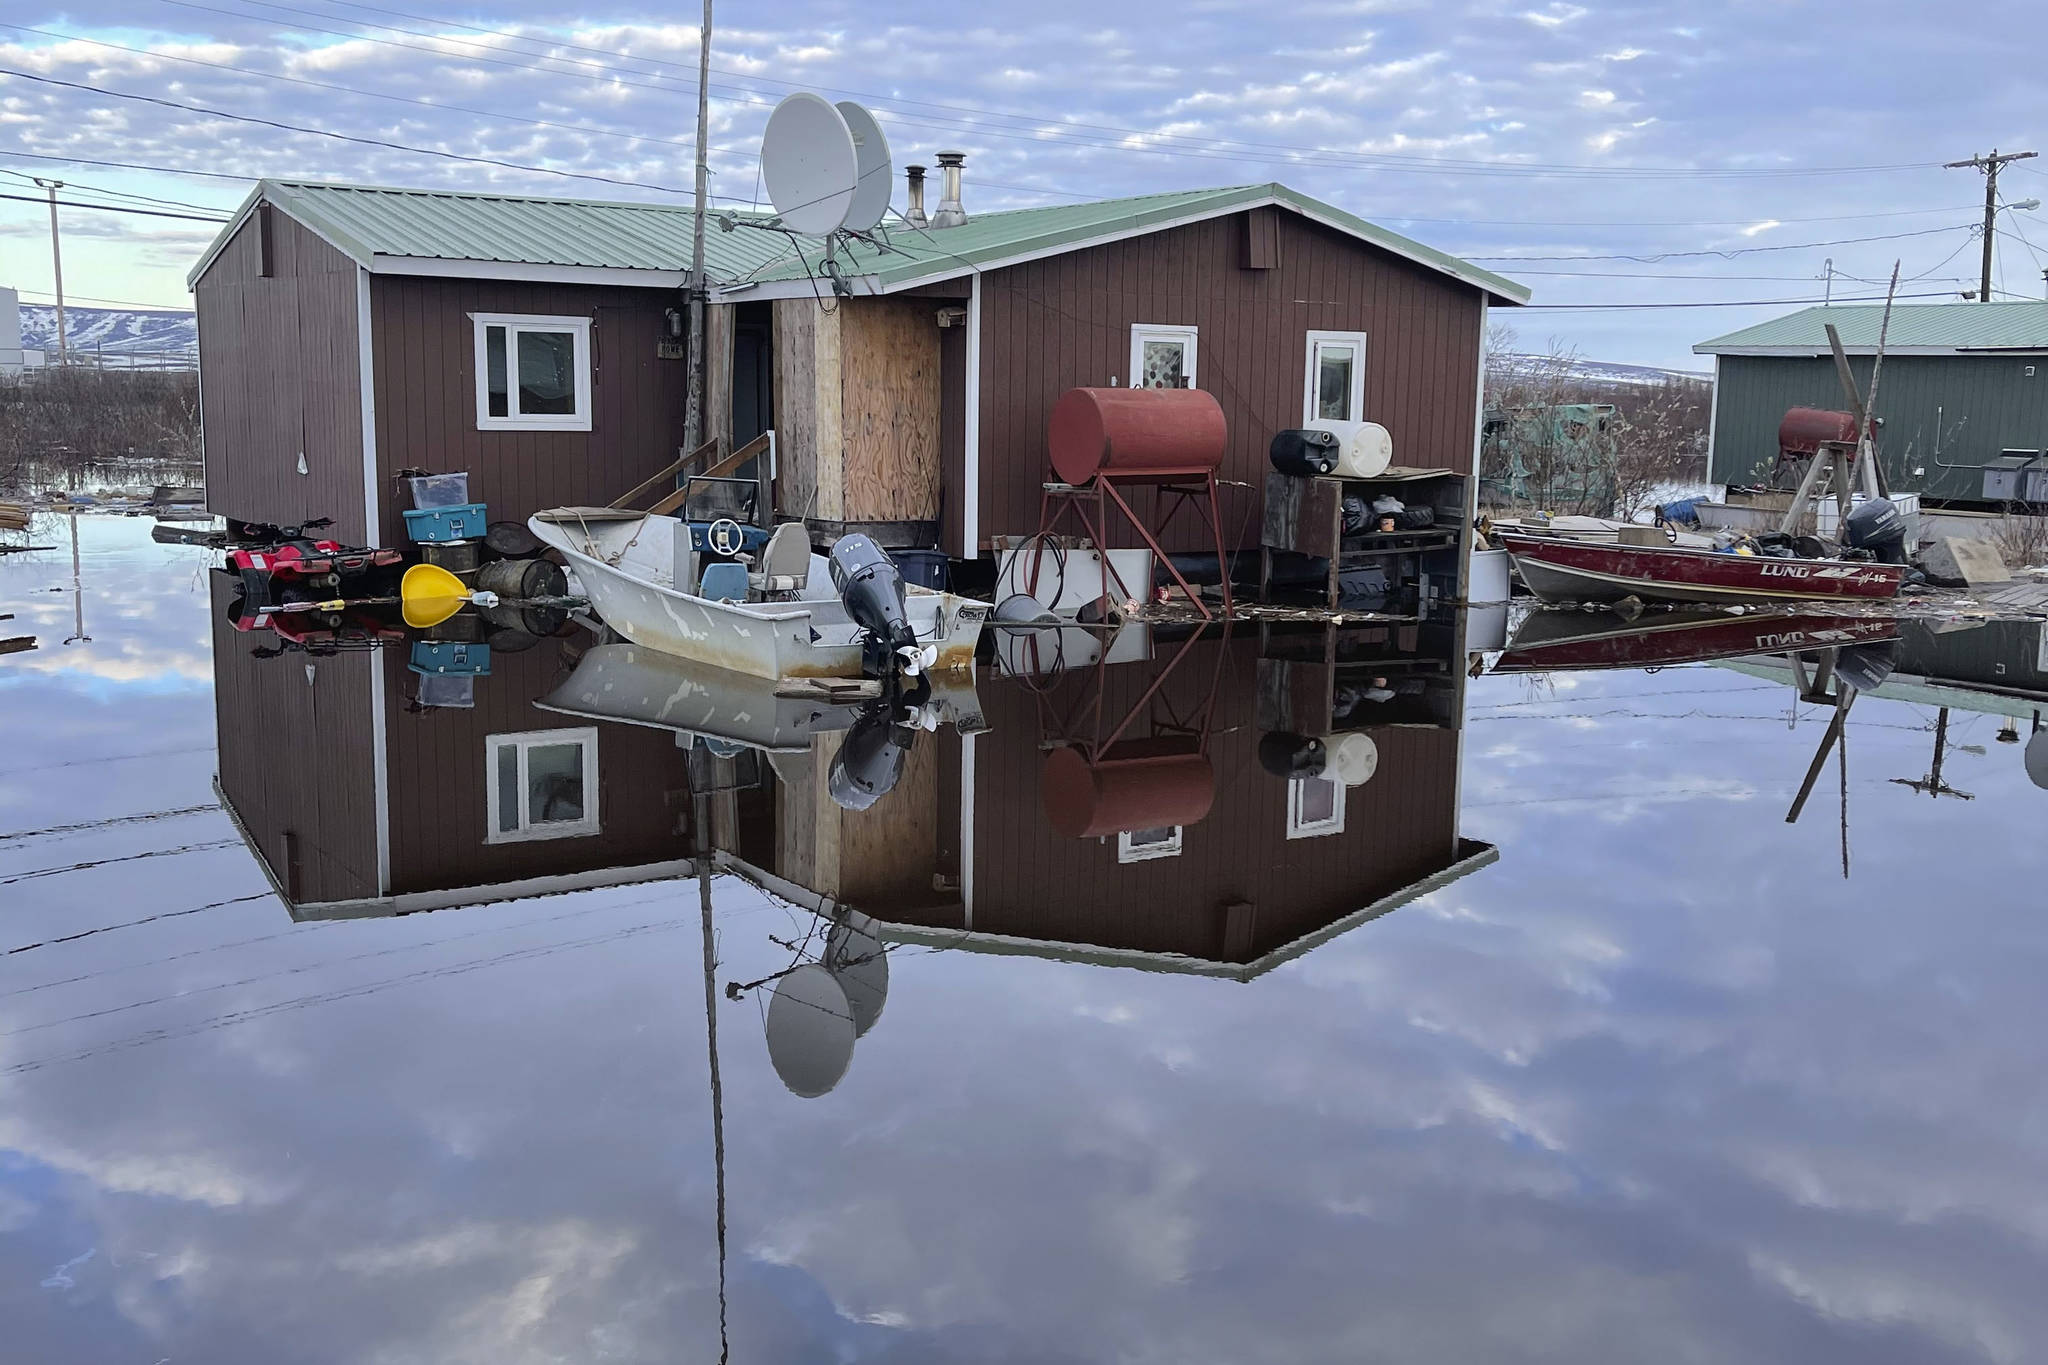 This photo provided by Nathan Hadley Jr. shows flooding in the village of Buckland, Alaska, on Thursday, May 13, 2021. An ice jam on the Buckland River, a half mile below the community, has caused the entire village of about 500 residents in northwest Alaska to be completely inundated. (Nathan Hadley Jr. via AP)